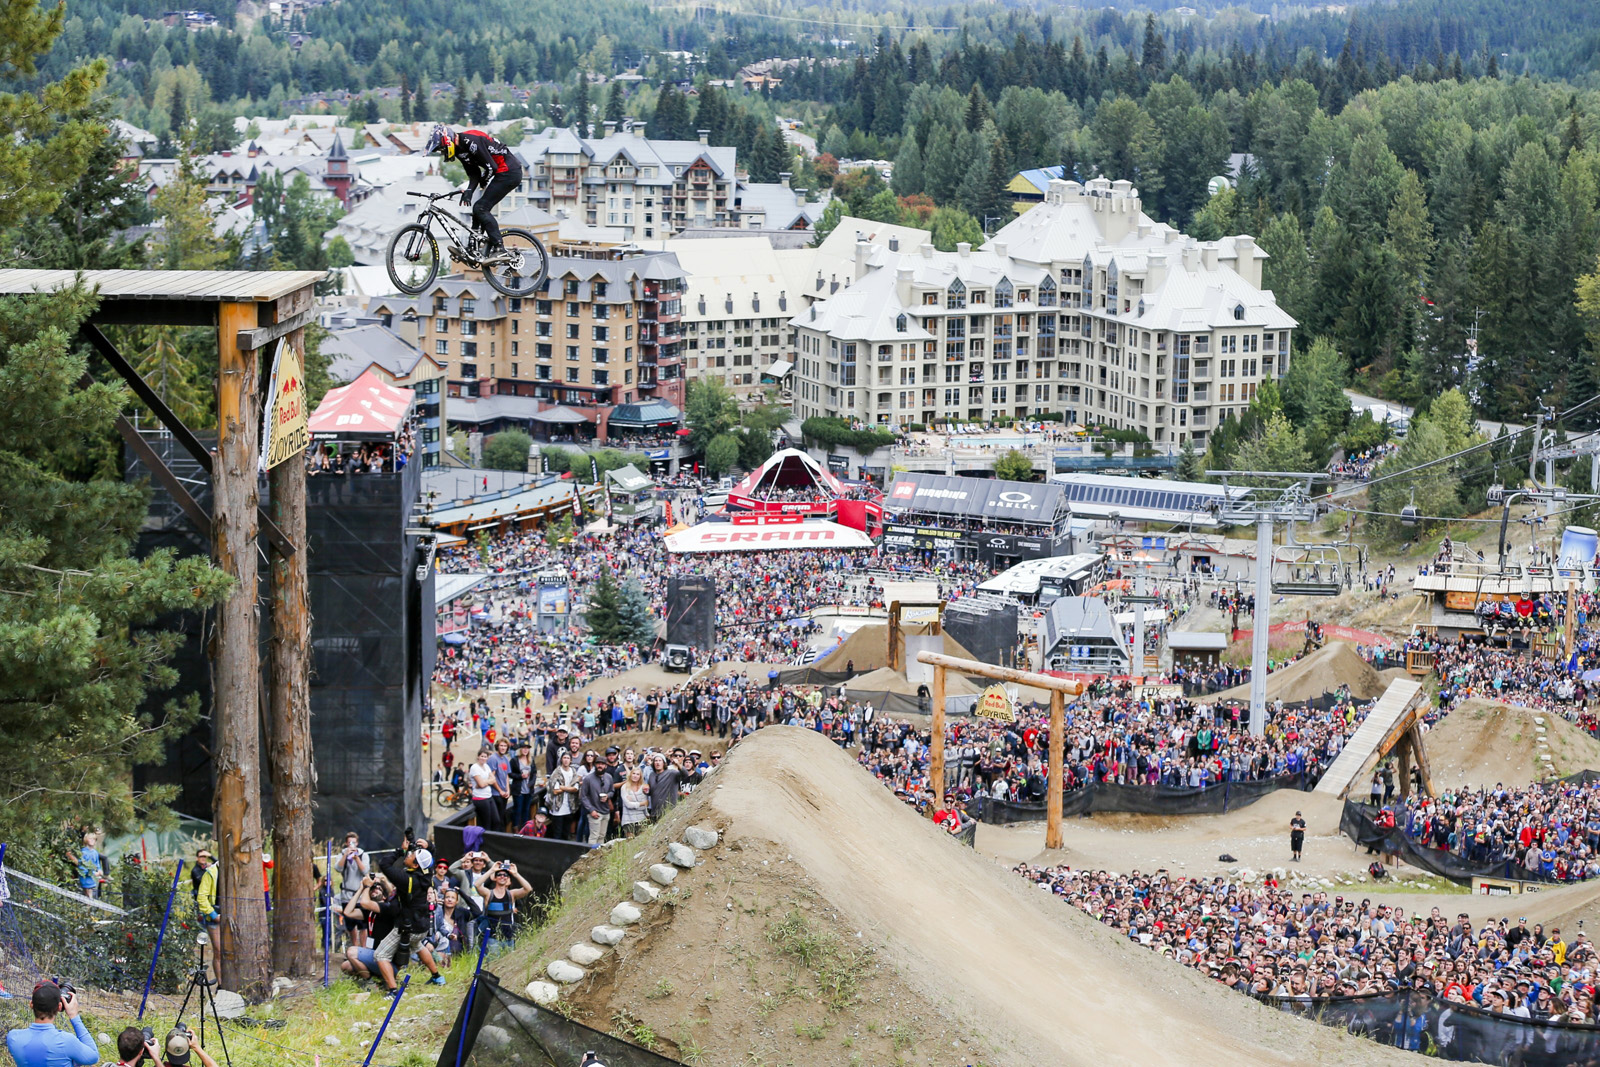 Brandon Semenuk performs an opposite truckdriver at the Red Bull Joyride in Whistler, Canada on August 16th, 2015 // Jussi Grznar / Red Bull Content Pool // P-20150817-00006 // Usage for editorial use only // Please go to www.redbullcontentpool.com for further information. //